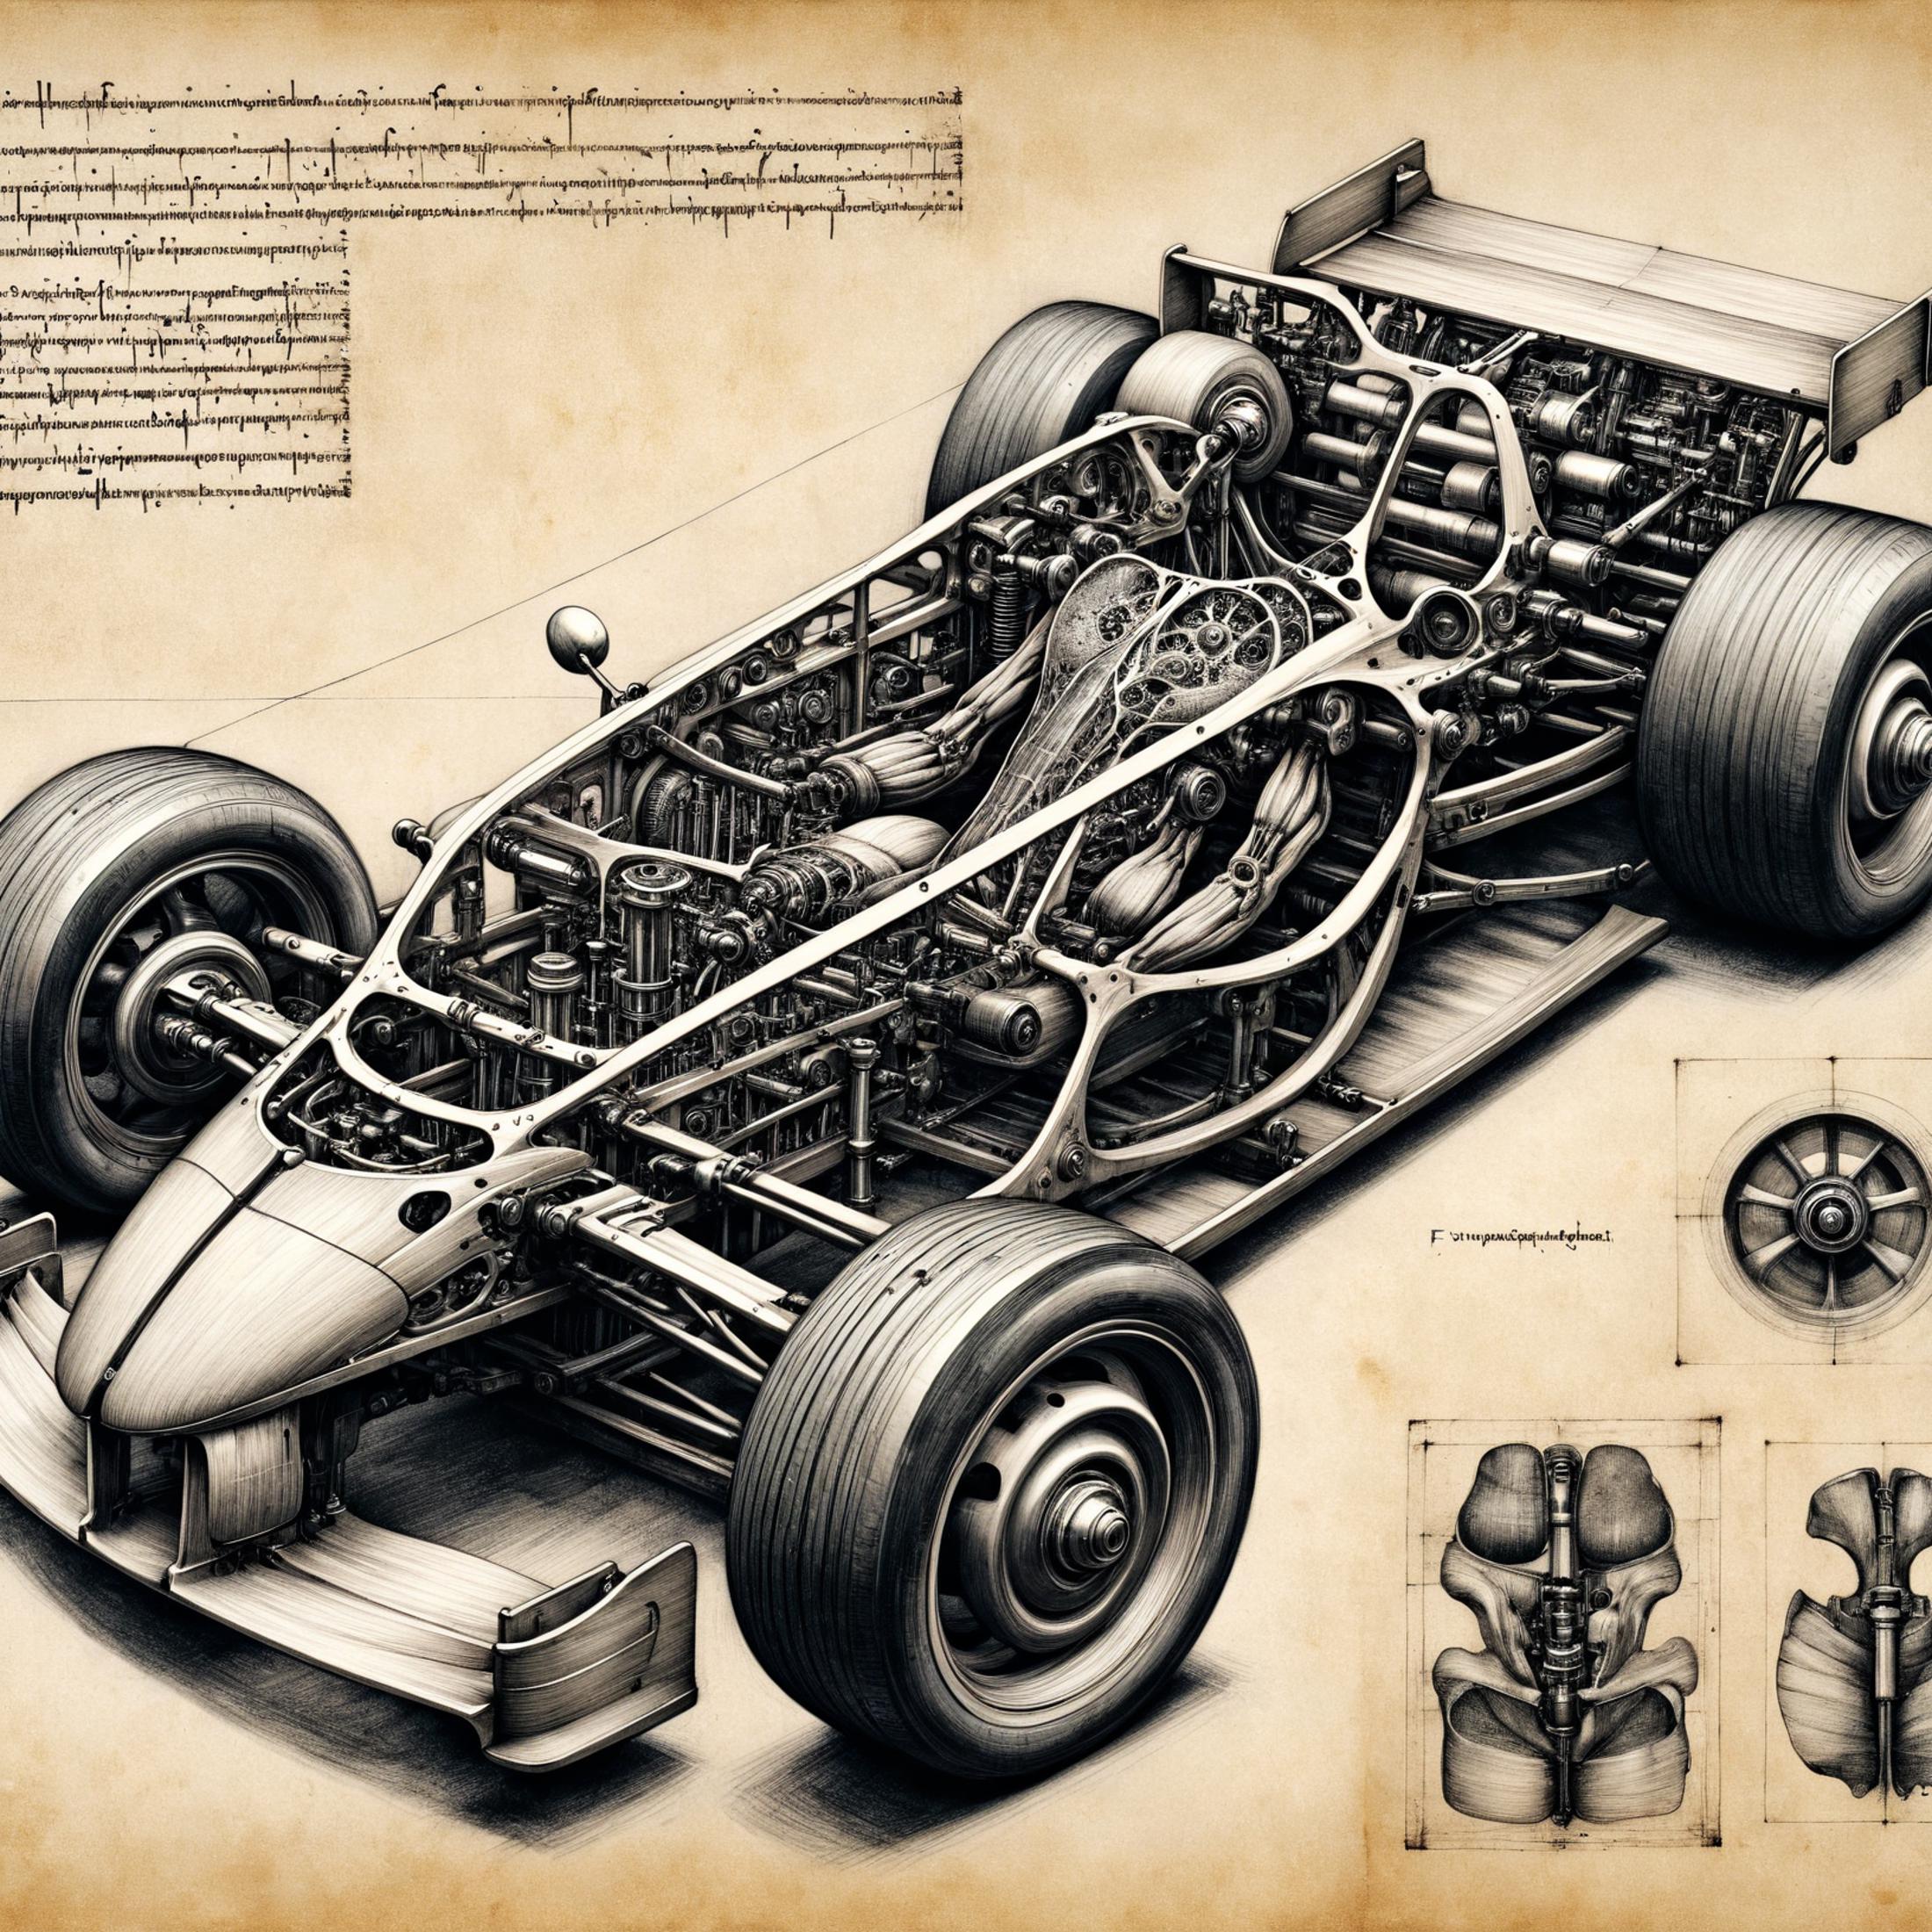 A hand drawn illustration of a racing car engine.